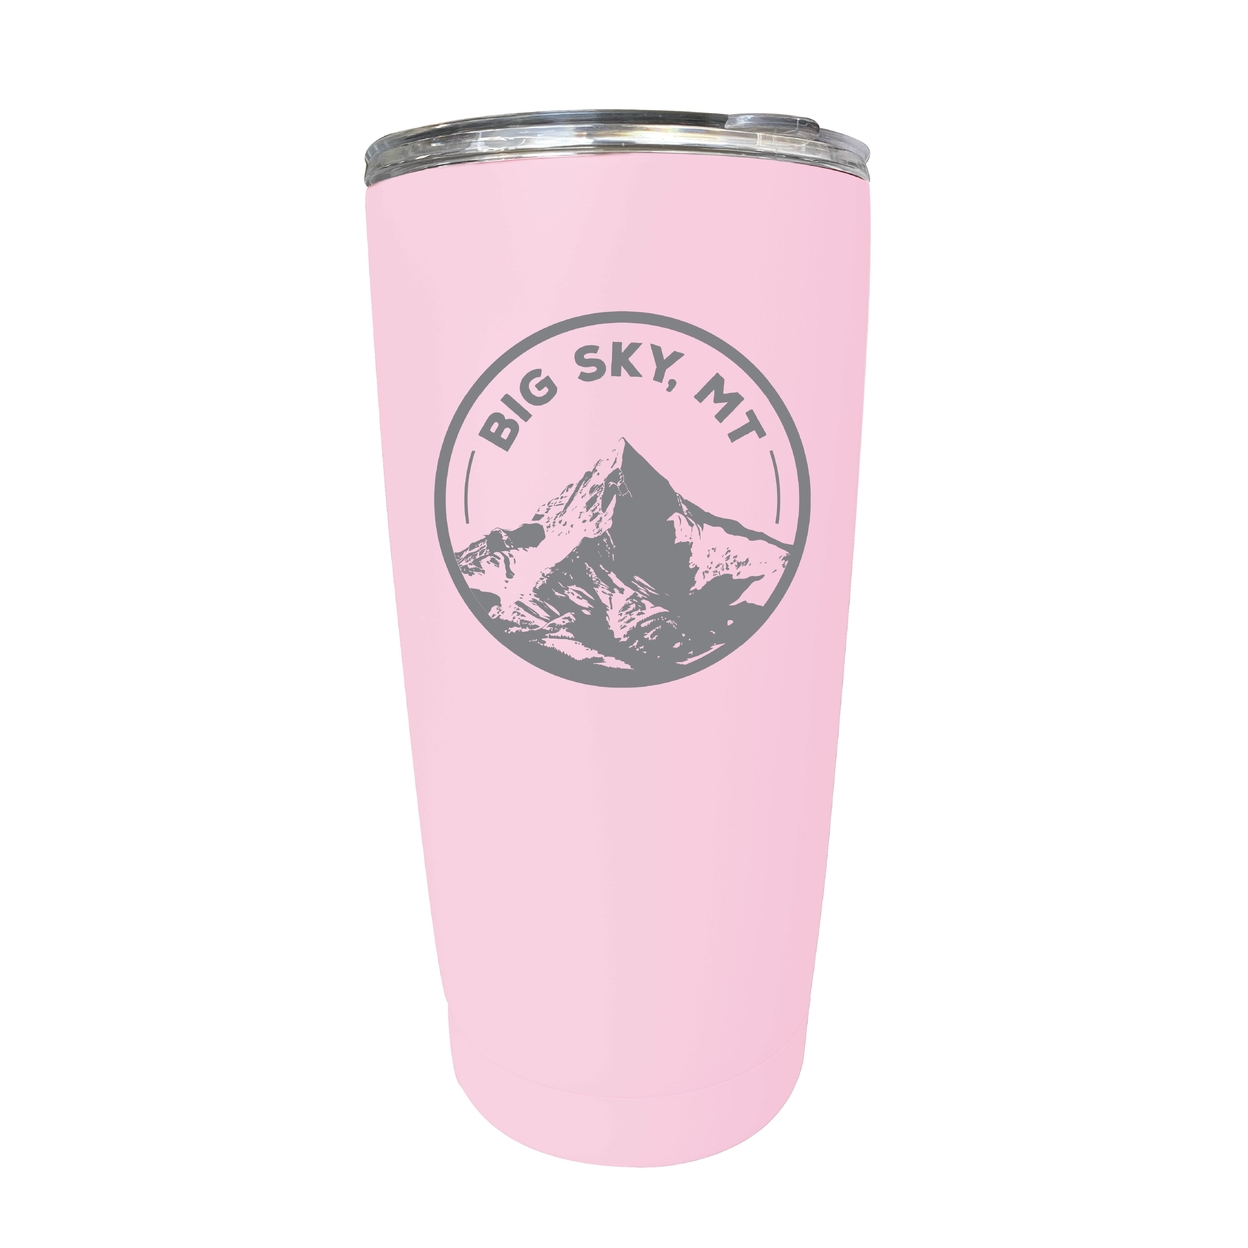 Big Sky Montana Souvenir 16 Oz Engraved Stainless Steel Insulated Tumbler - Pink,,Single Unit